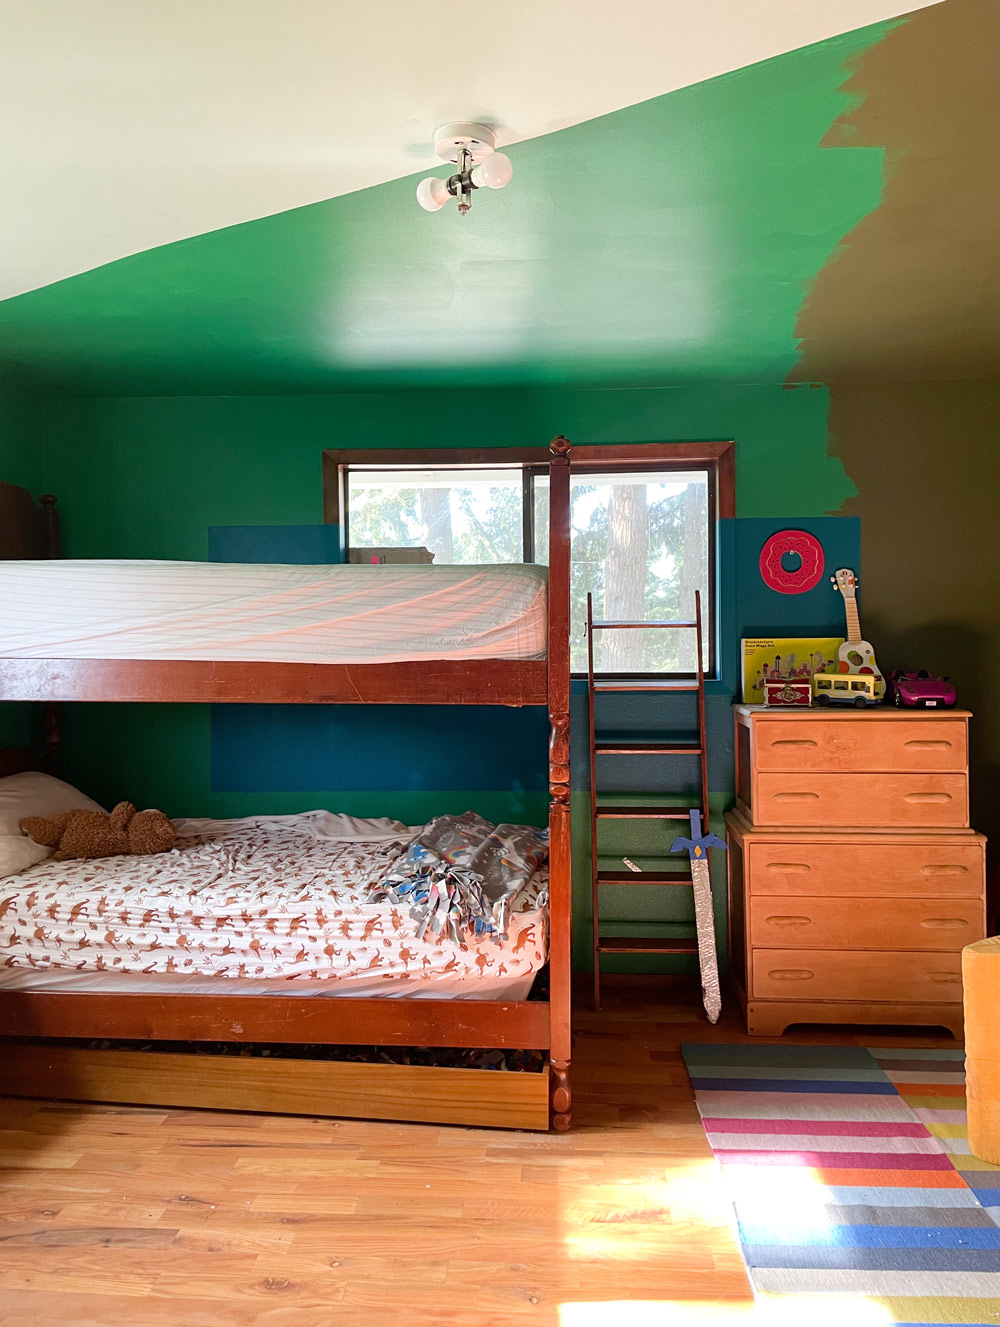 Bunk beds and a dresser with a ceiling painted green.